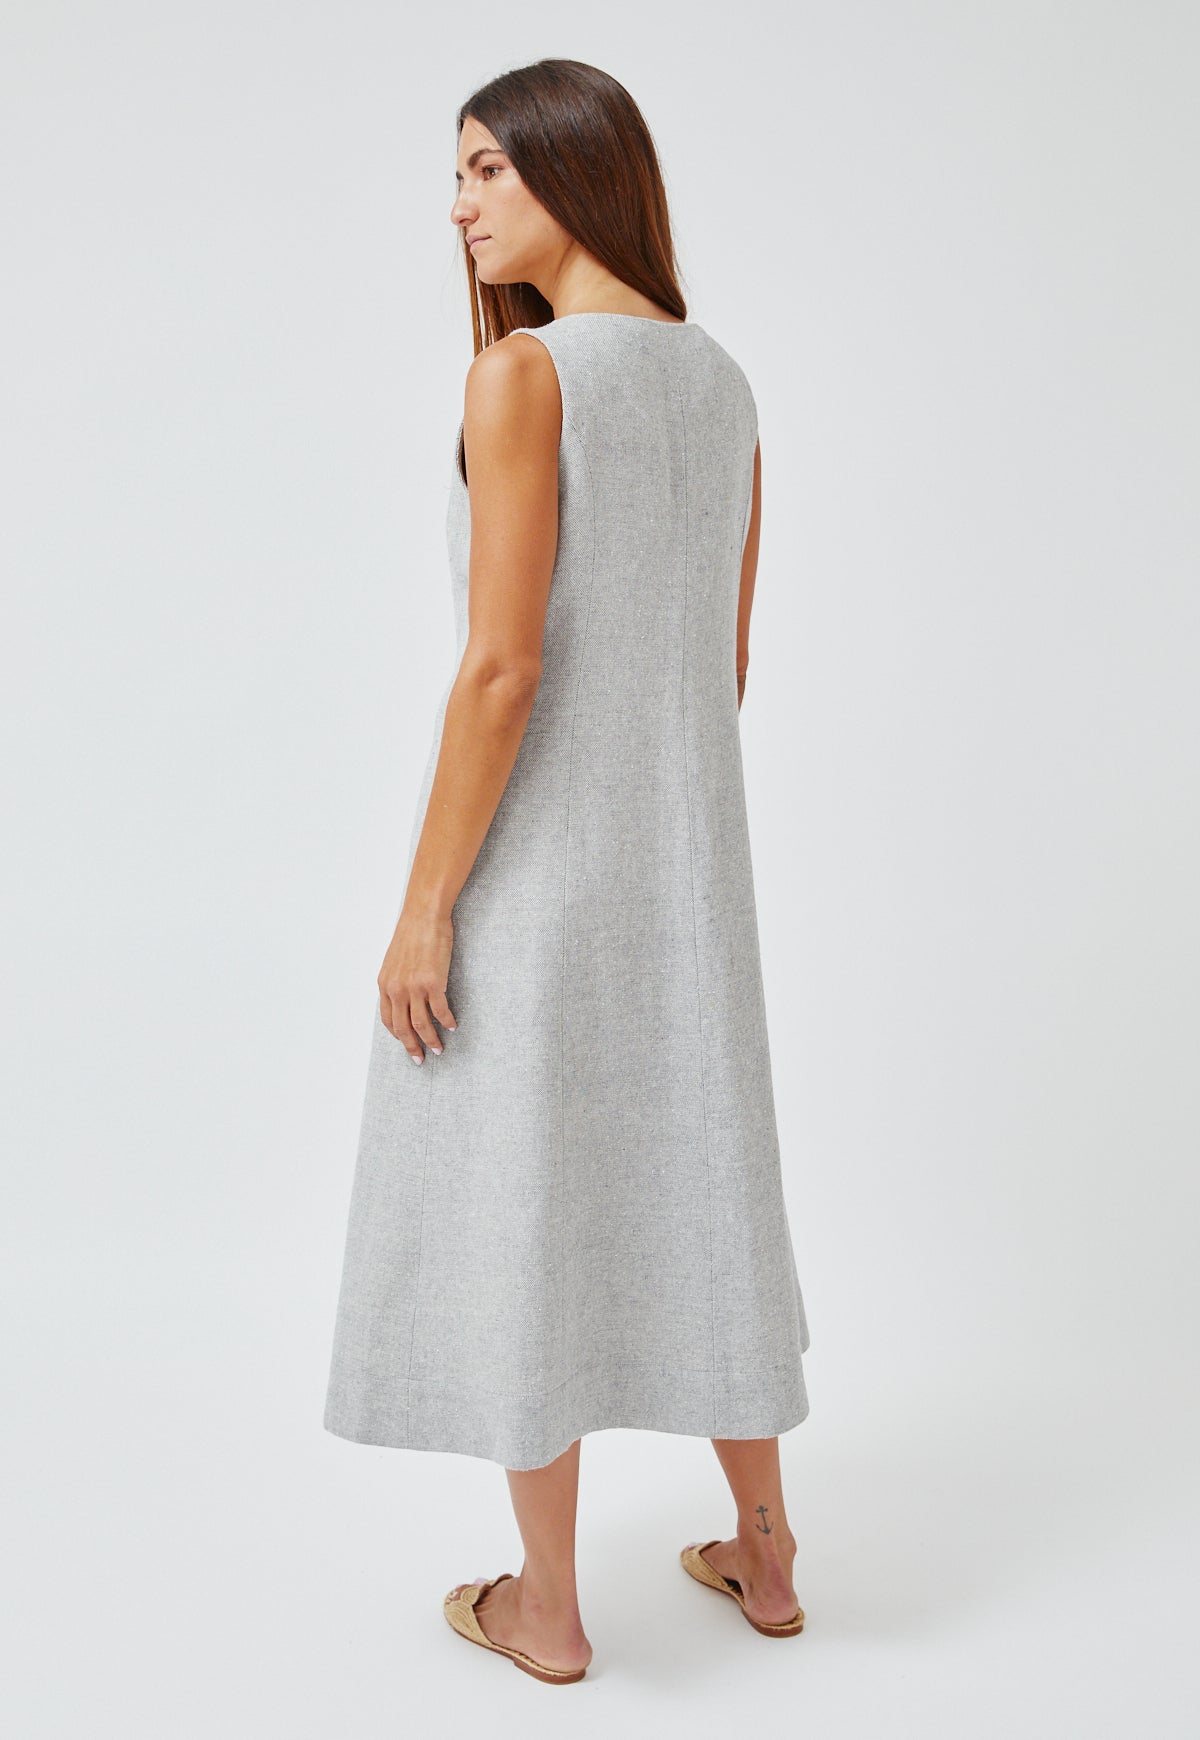 THE SCALLOP WRAP DRESS in VINTAGE BLUE SUMMER TWEED LINEN